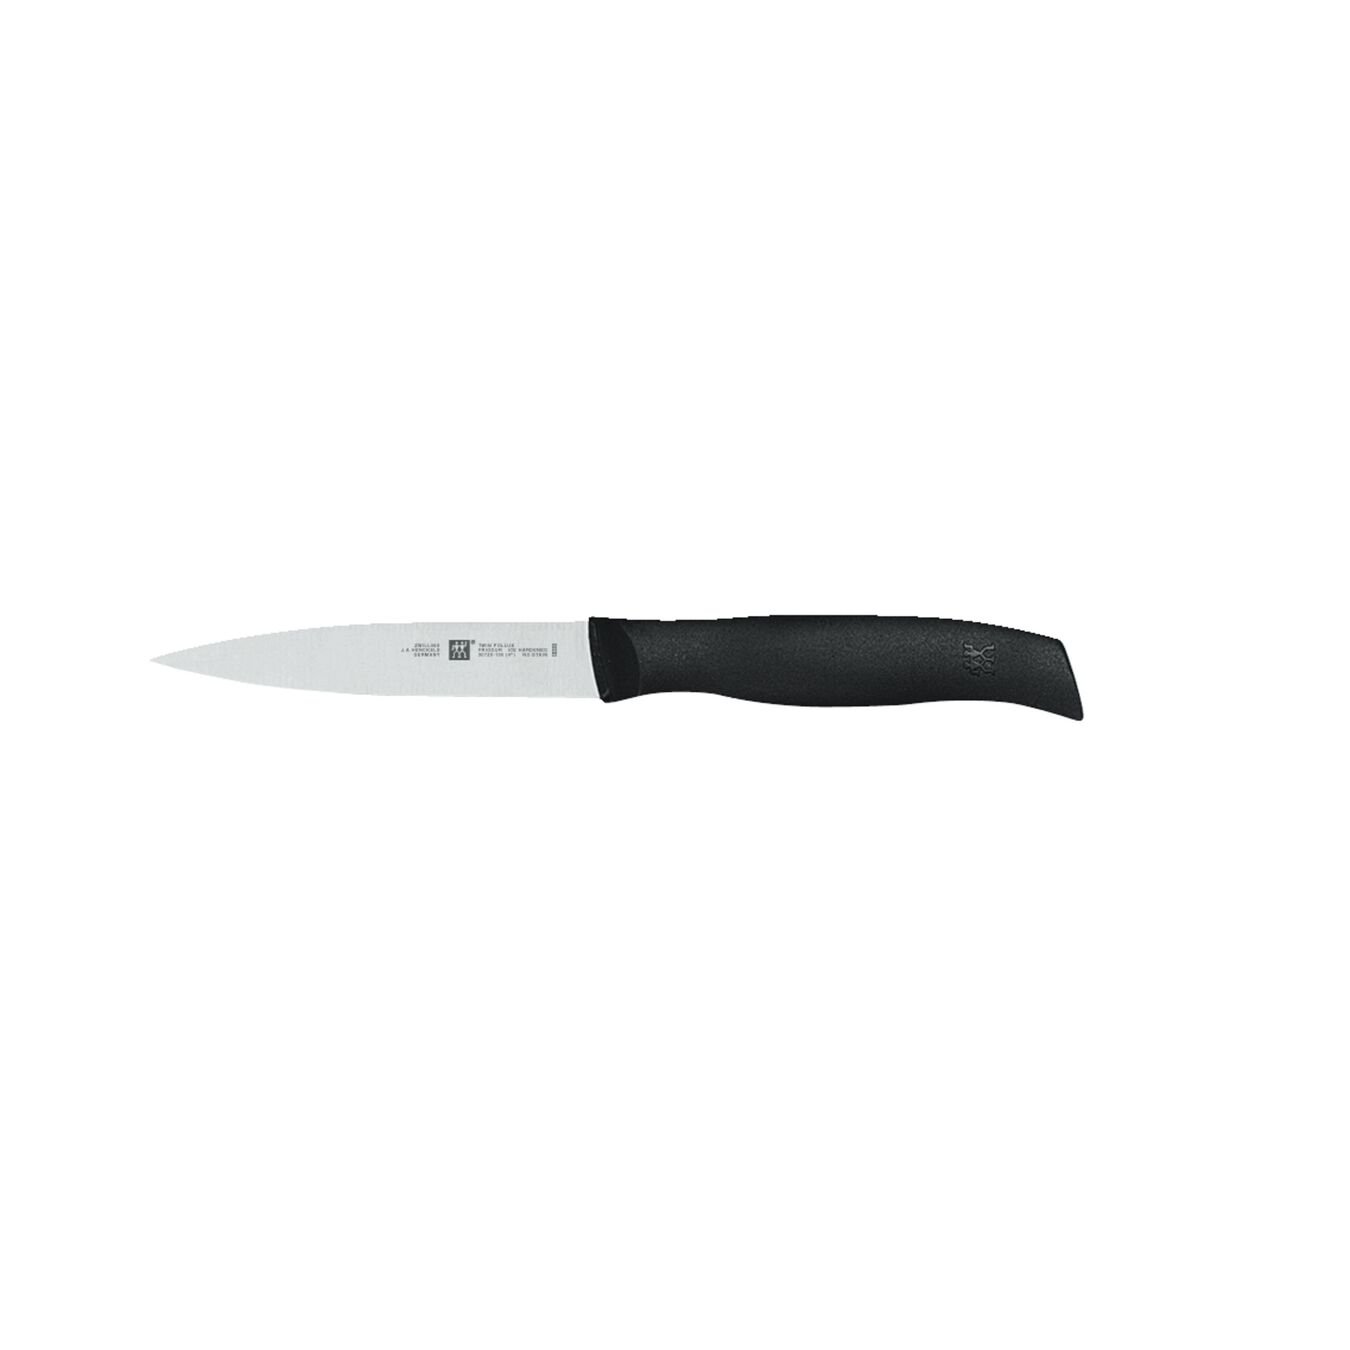 4 inch Paring knife - Visual Imperfections,,large 1